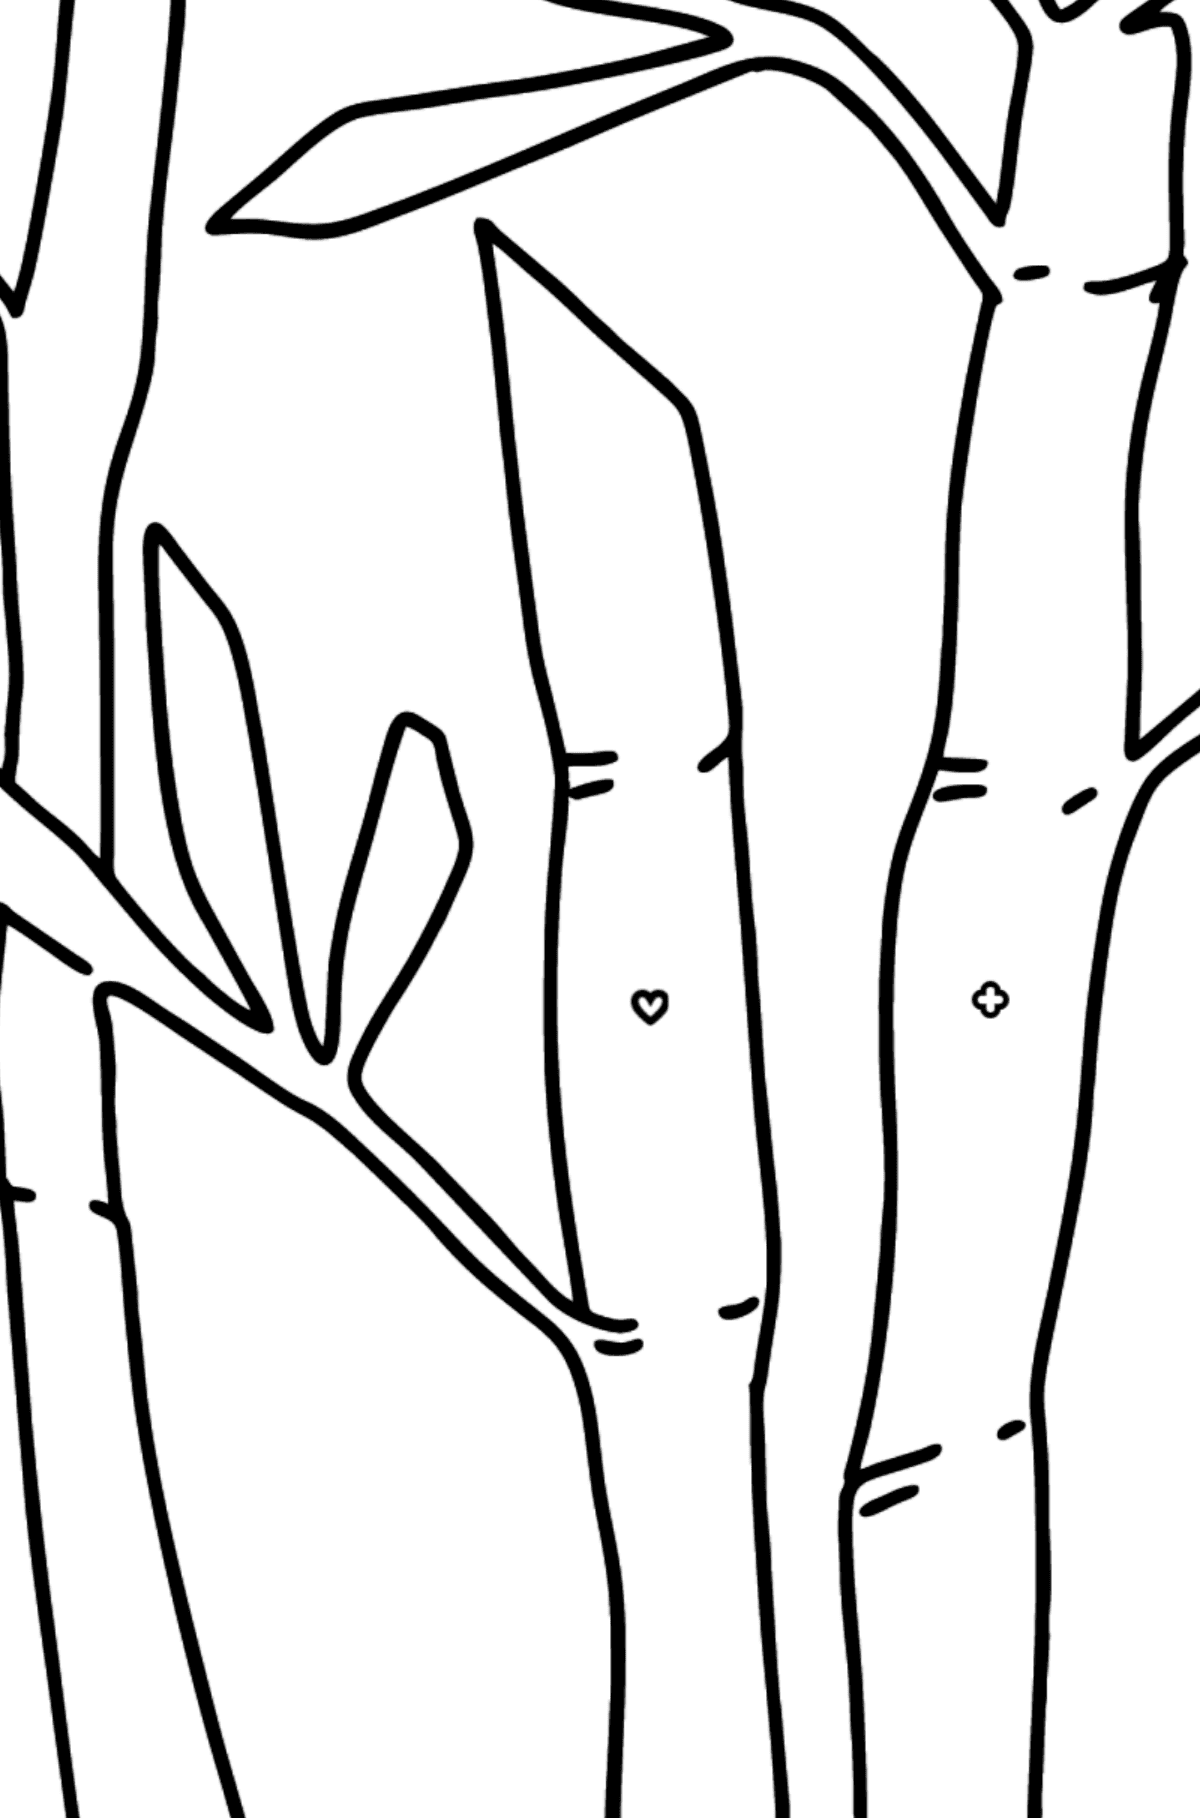 Bamboo coloring page - simple - Coloring by Symbols and Geometric Shapes for Kids